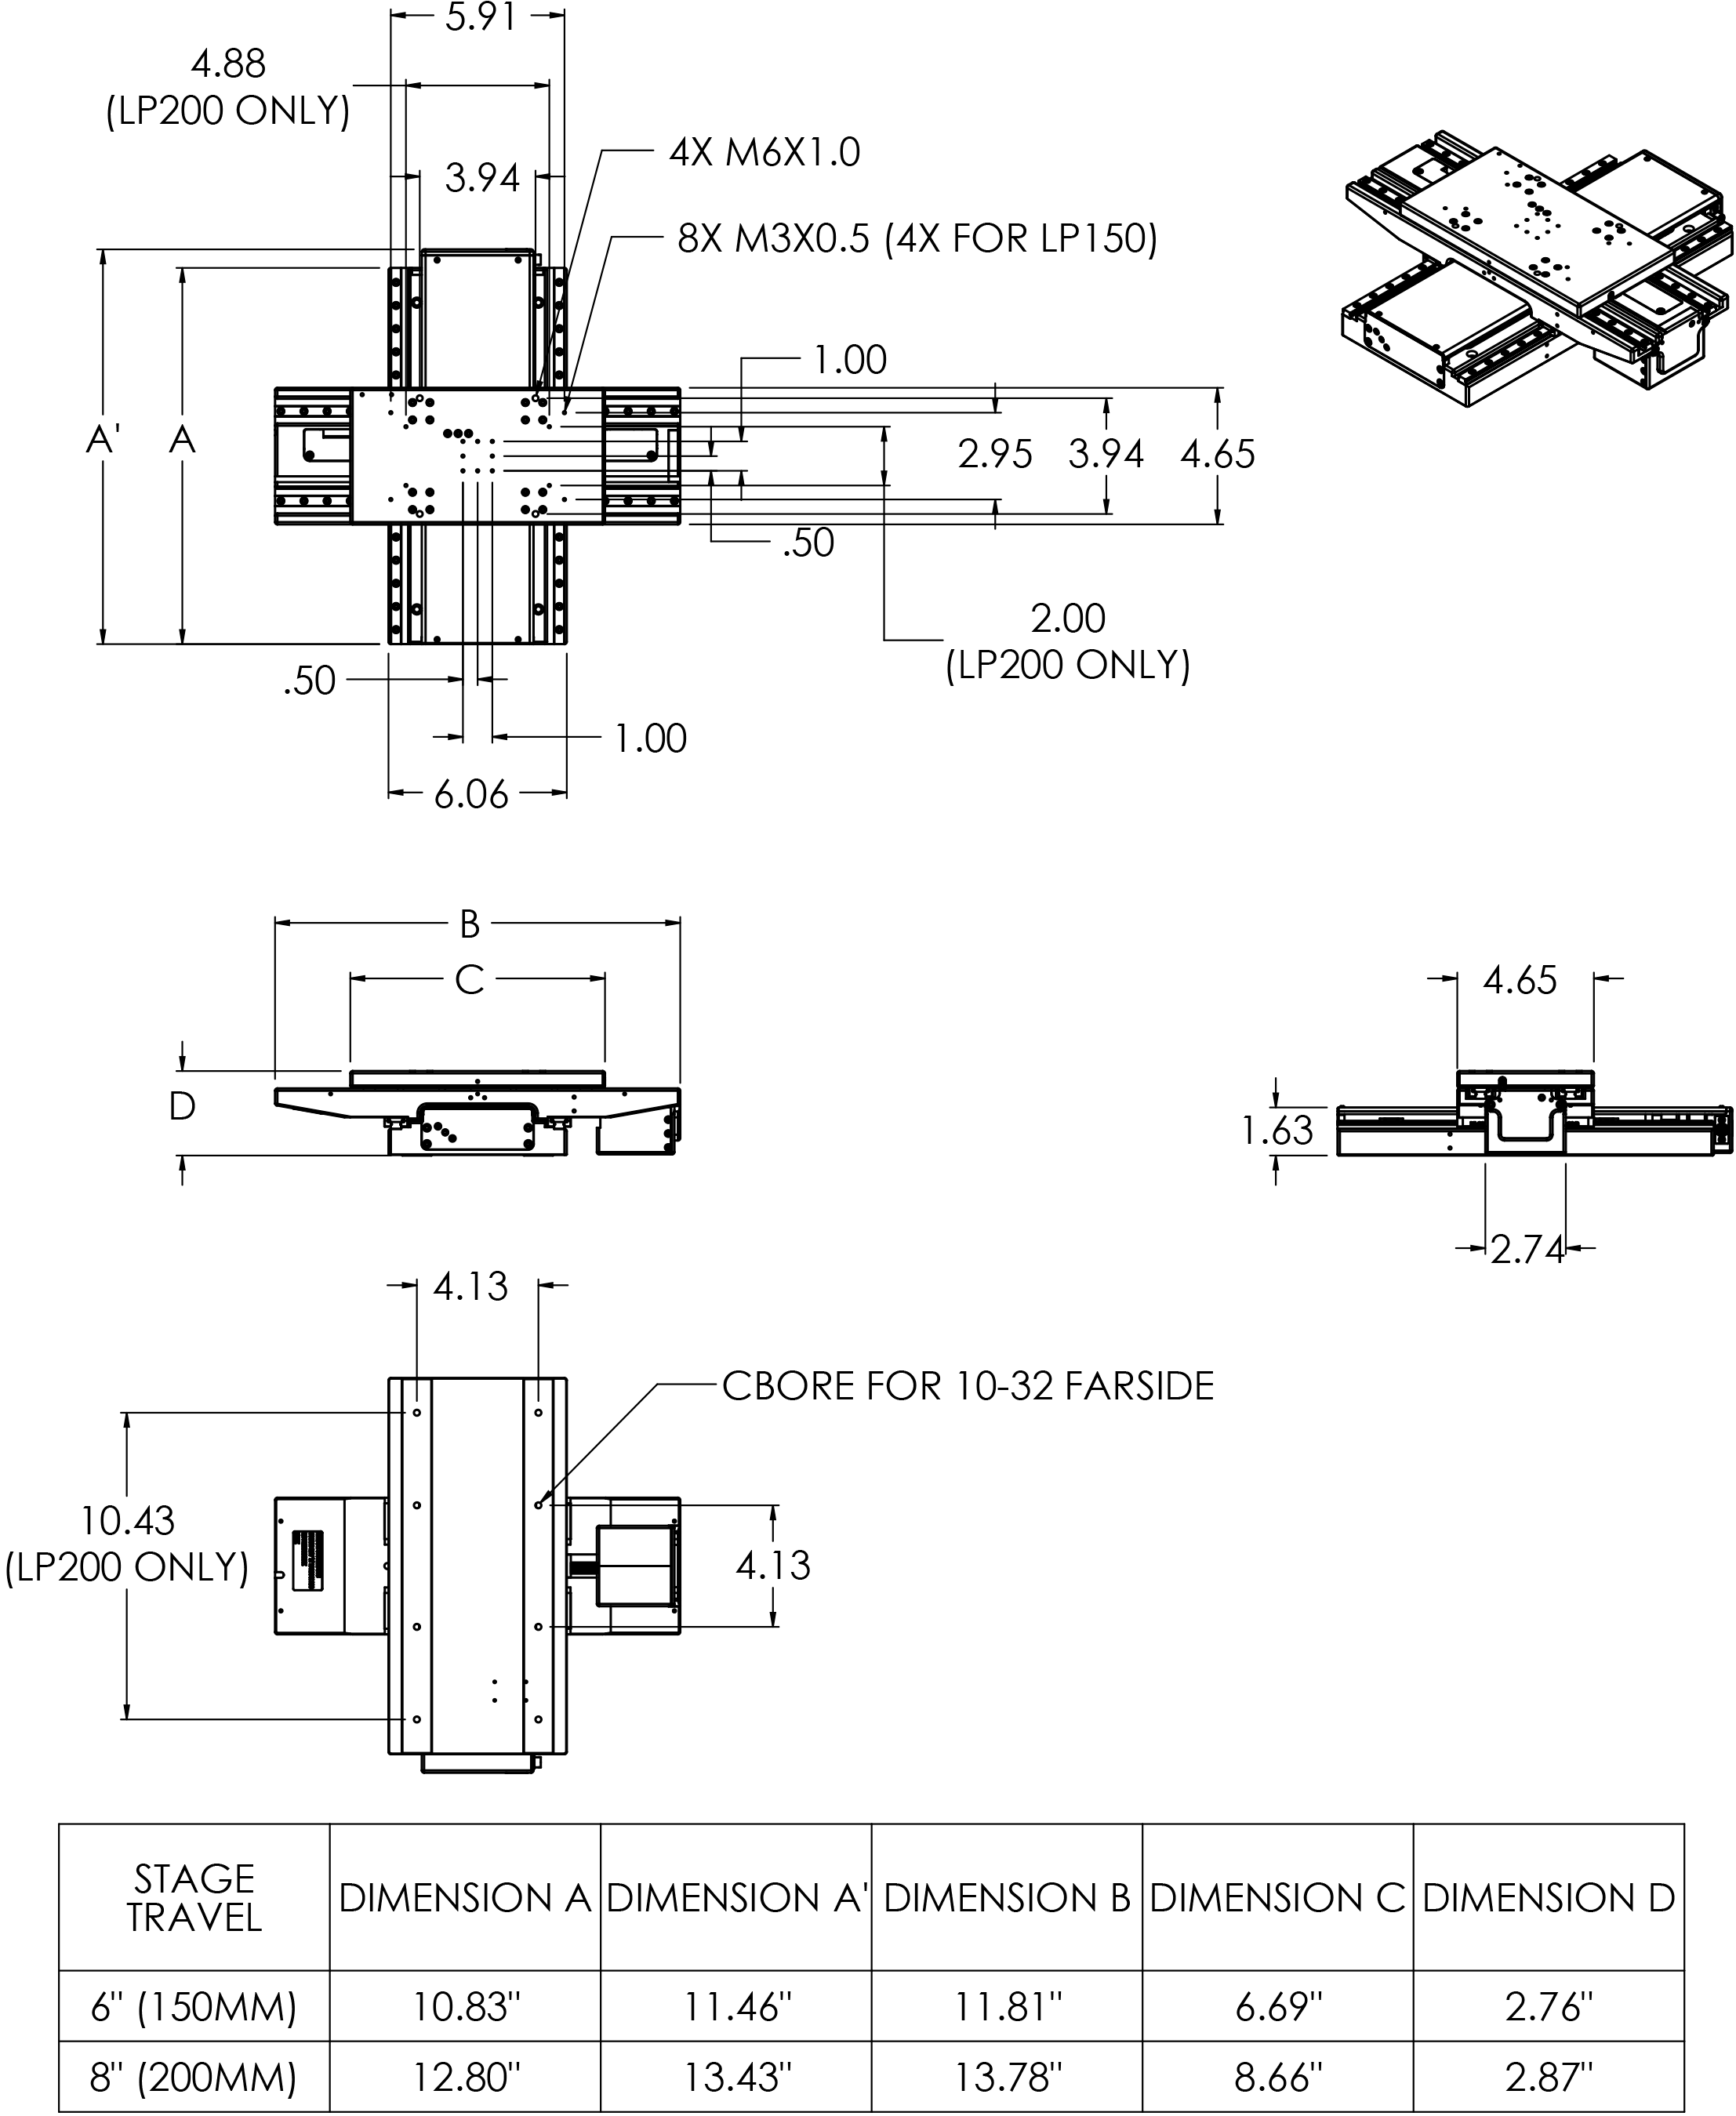 Dimensional Drawings of LP150 and LP200 XY Stages